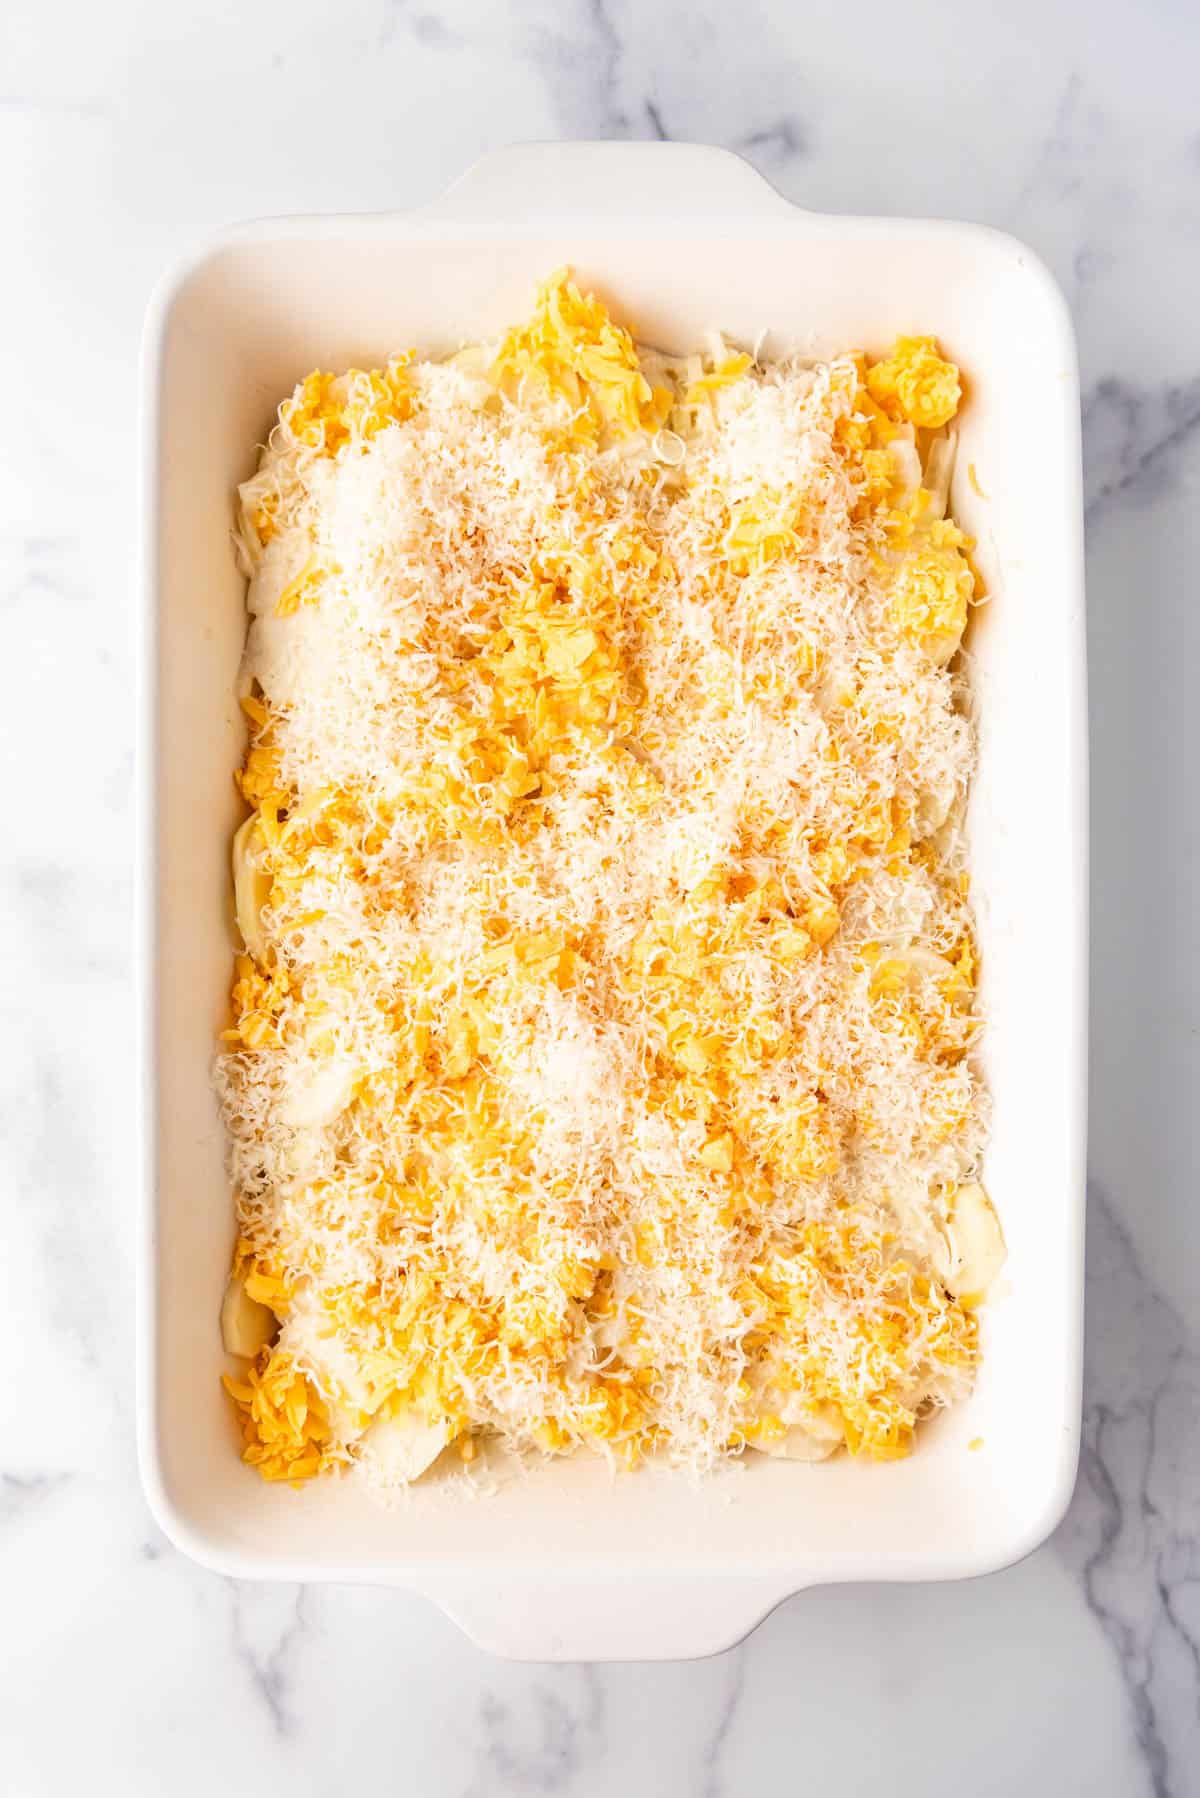 Grated parmesan and cheddar cheeses sprinkled over potatoes in a white casserole dish.